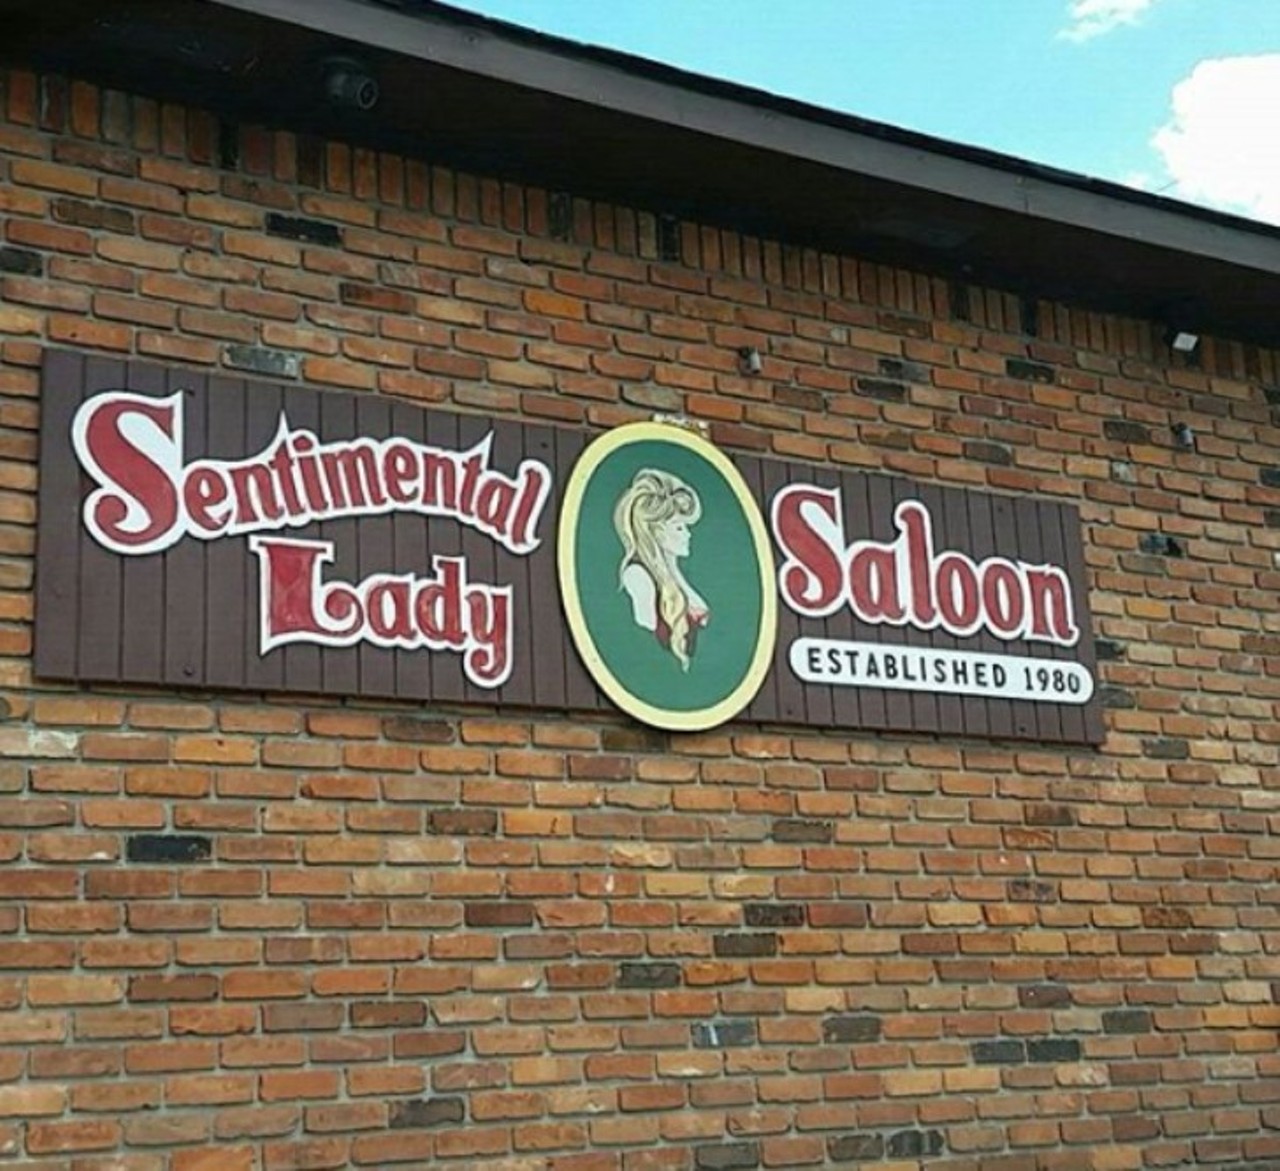 Sentimental Lady Saloon
36509 Jefferson Ave., Harrison Charter Township 
Grab your friends for a round of cheap beers and &#147;Juicy Loosie&#148; cheeseburgers at the Sentimental Lady. Once you&#146;ve gained enough liquid courage, hit the stage for some old-fashioned karaoke.  
Photo by @daveymacchiato